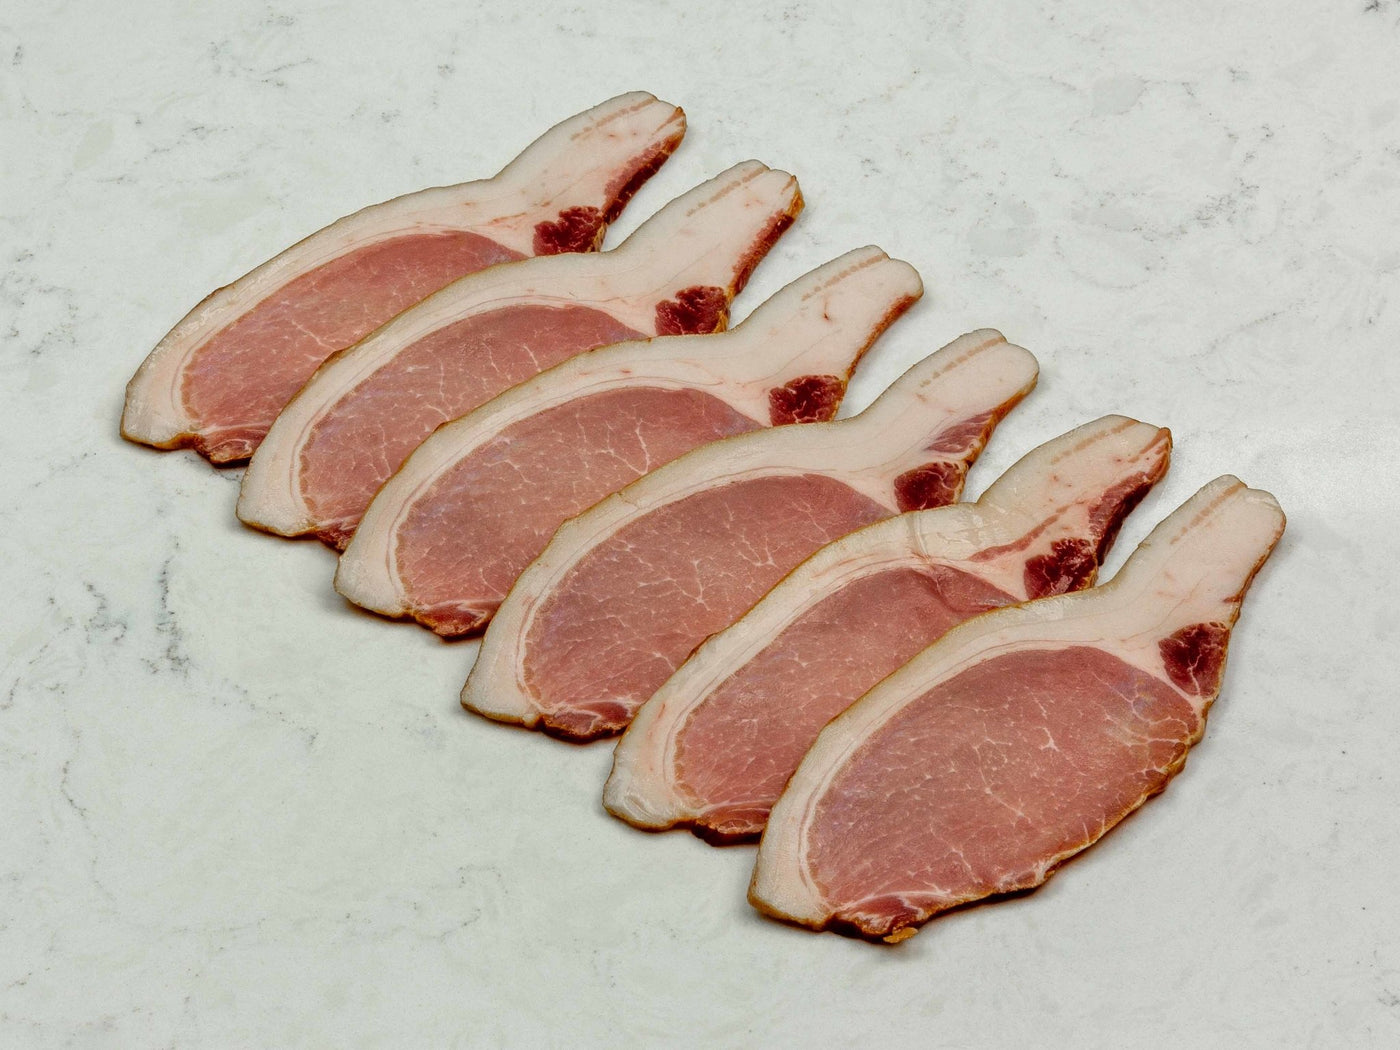 Blythburgh Free Range Dry Cured Back Bacon - Smoked - Thomas Joseph Butchery - Ethical Dry-Aged Meat The Best Steak UK Thomas Joseph Butchery